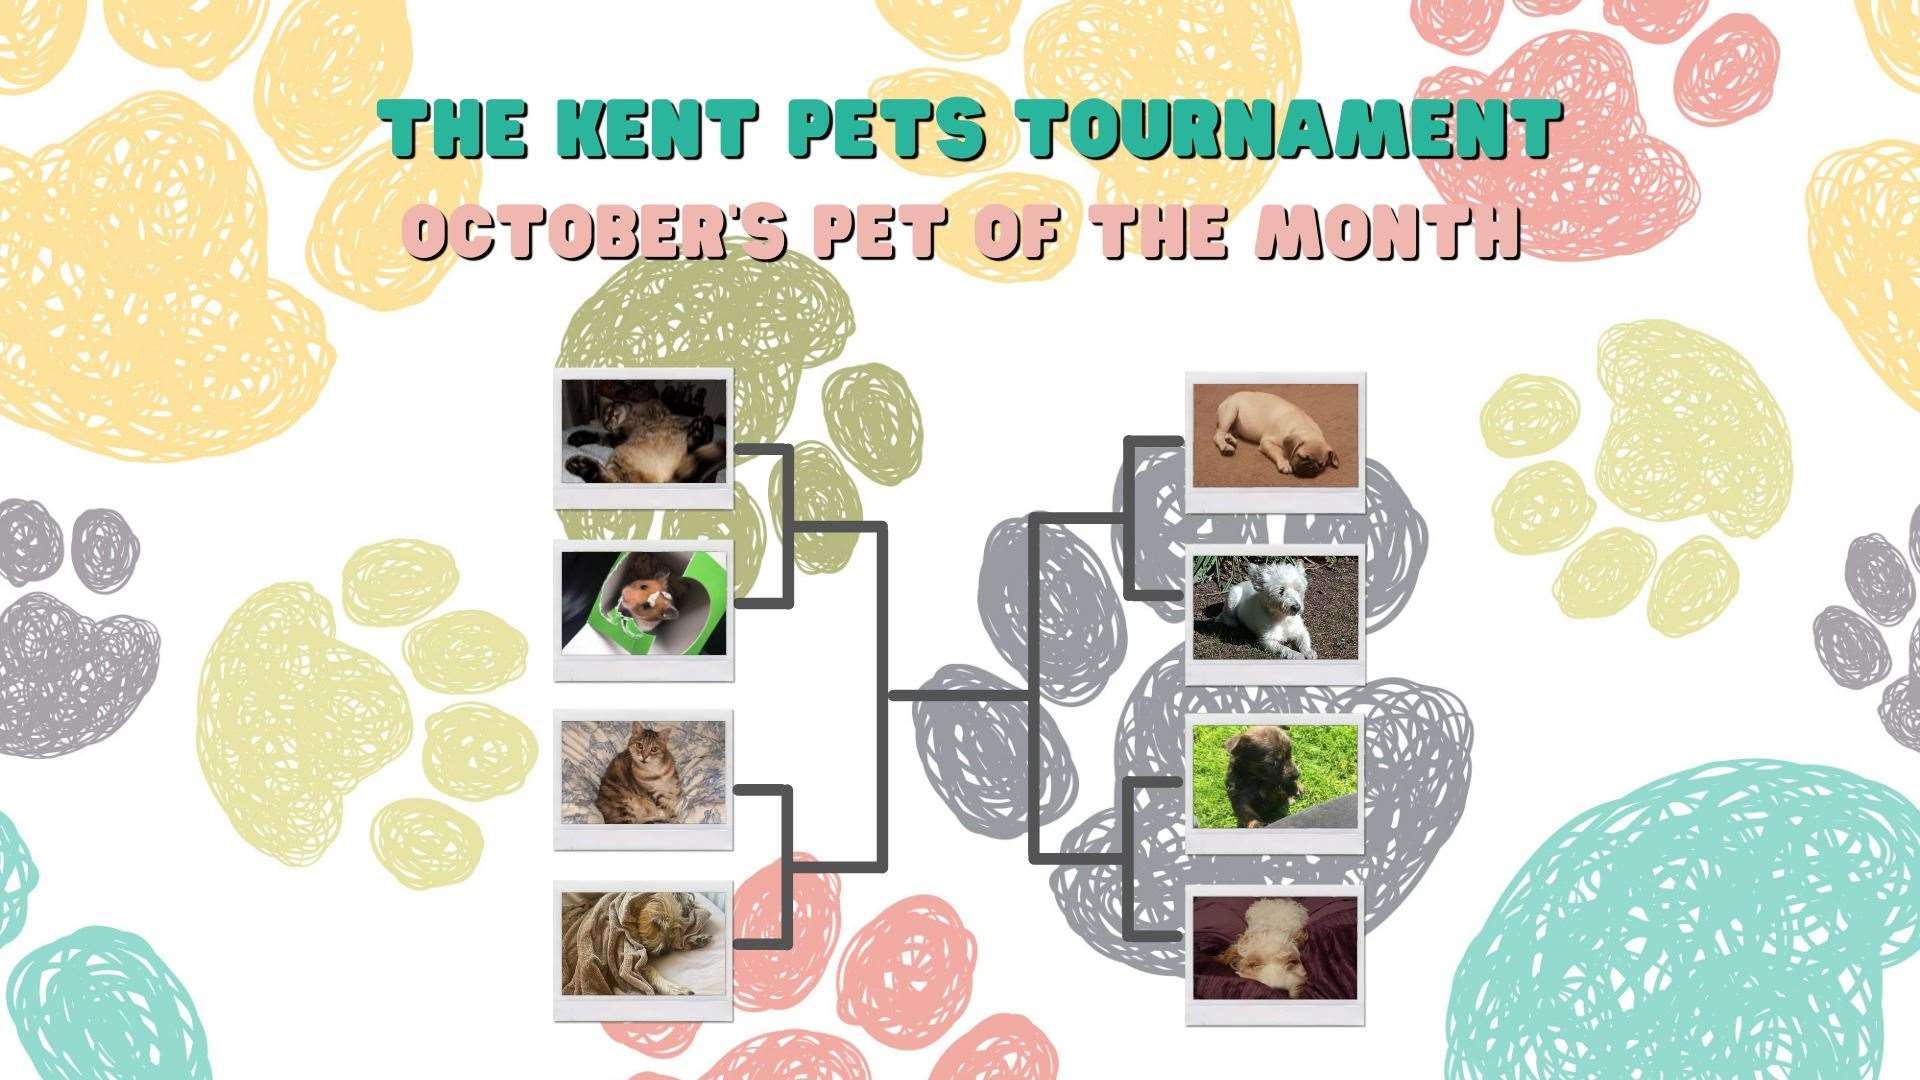 Who do you think should go into the next round of Kent Pets Tournament?